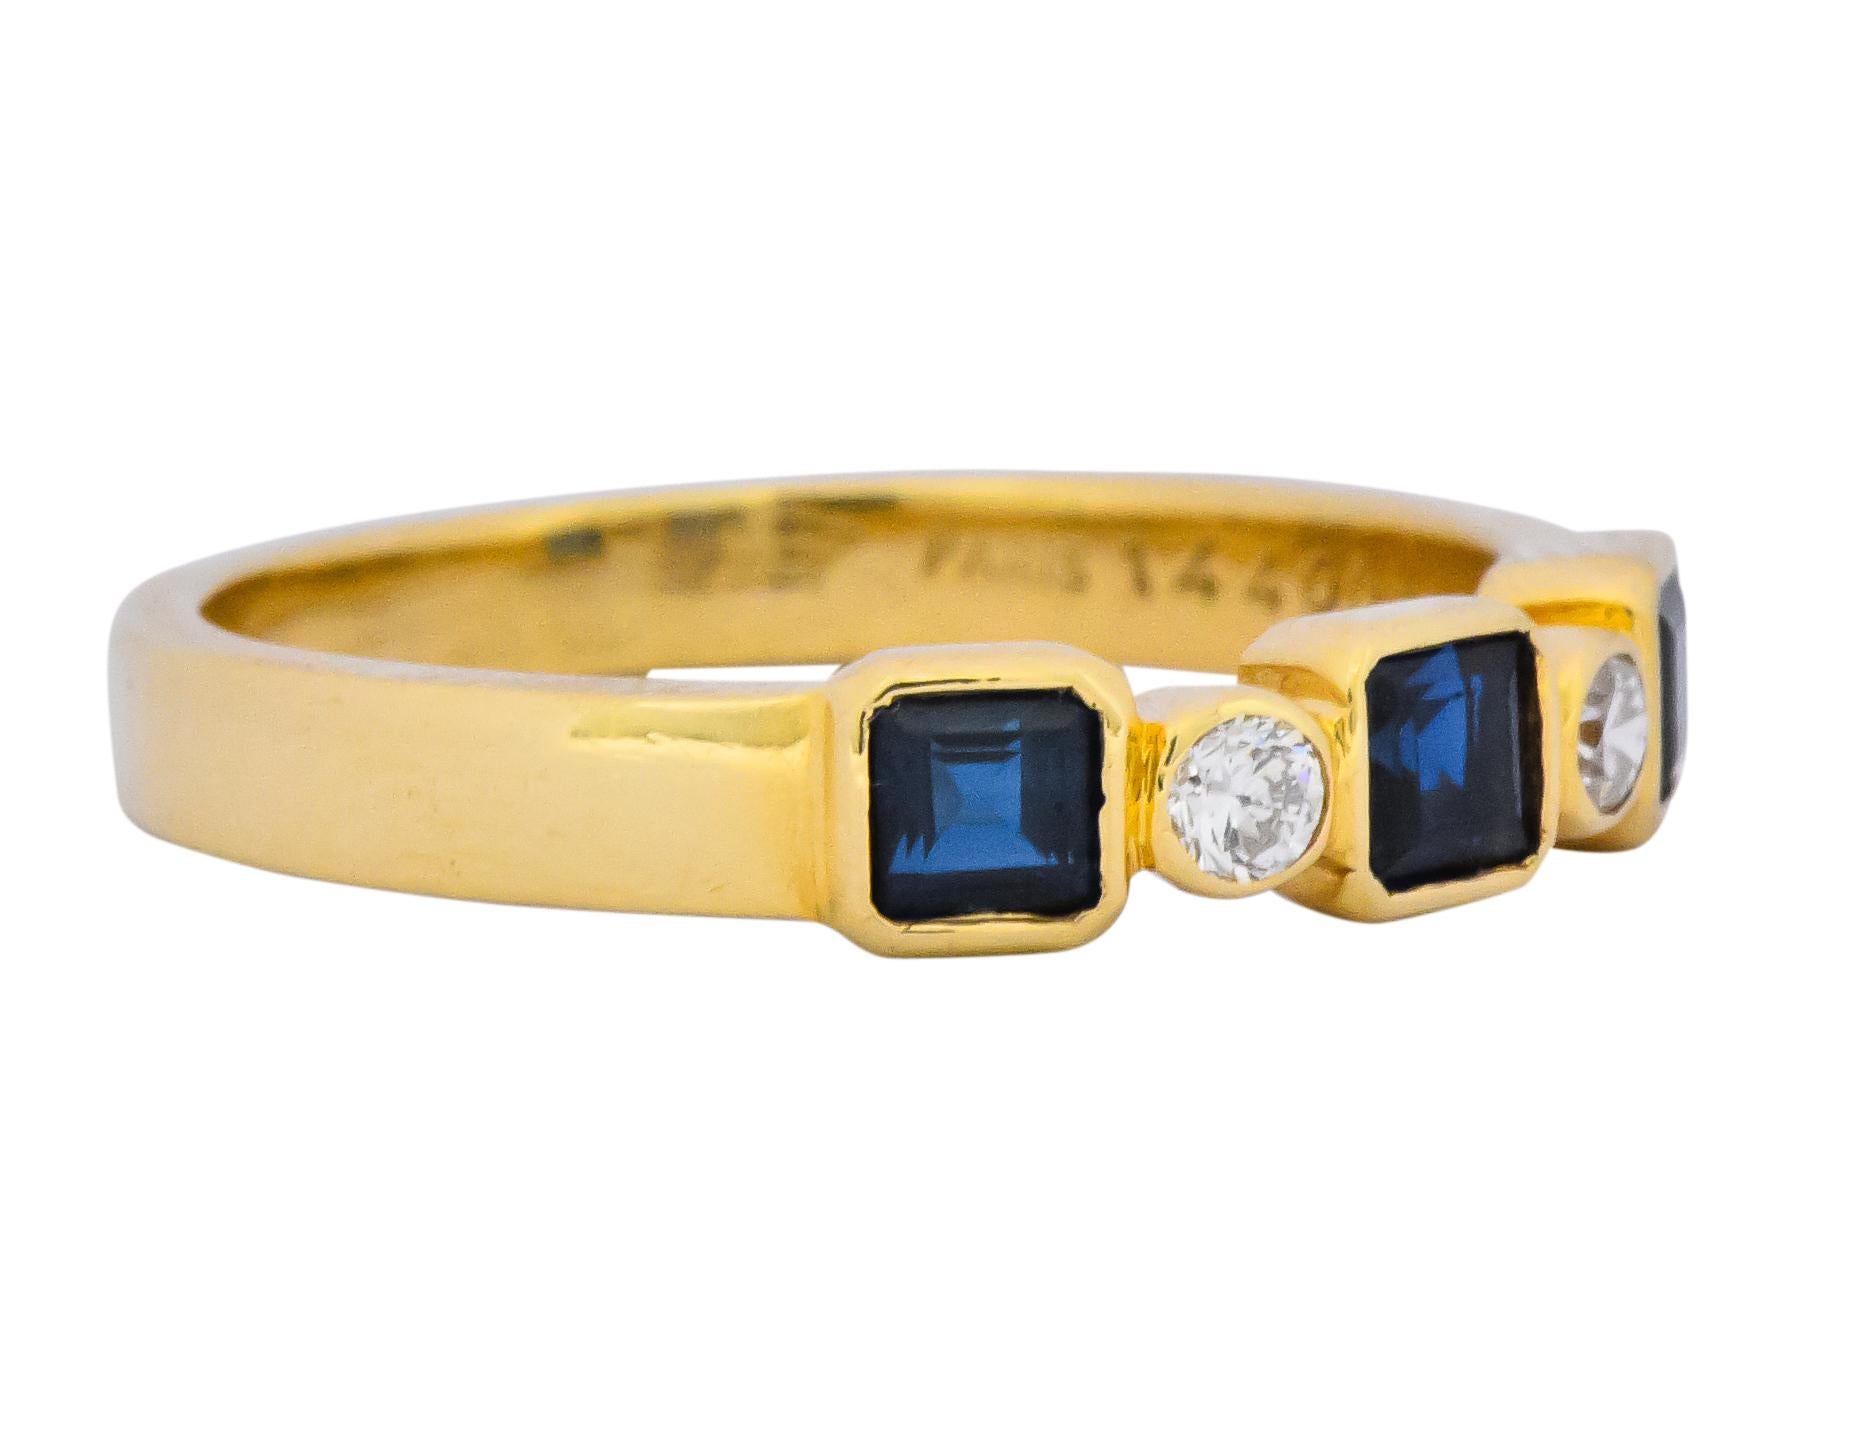 Featuring sapphires and diamonds, bezel set to the front in band style ring

Centering three square cut sapphires weighing approximately 0.20 carat total, transparent inky blue in color

With two round brilliant cut diamonds weighing approximately